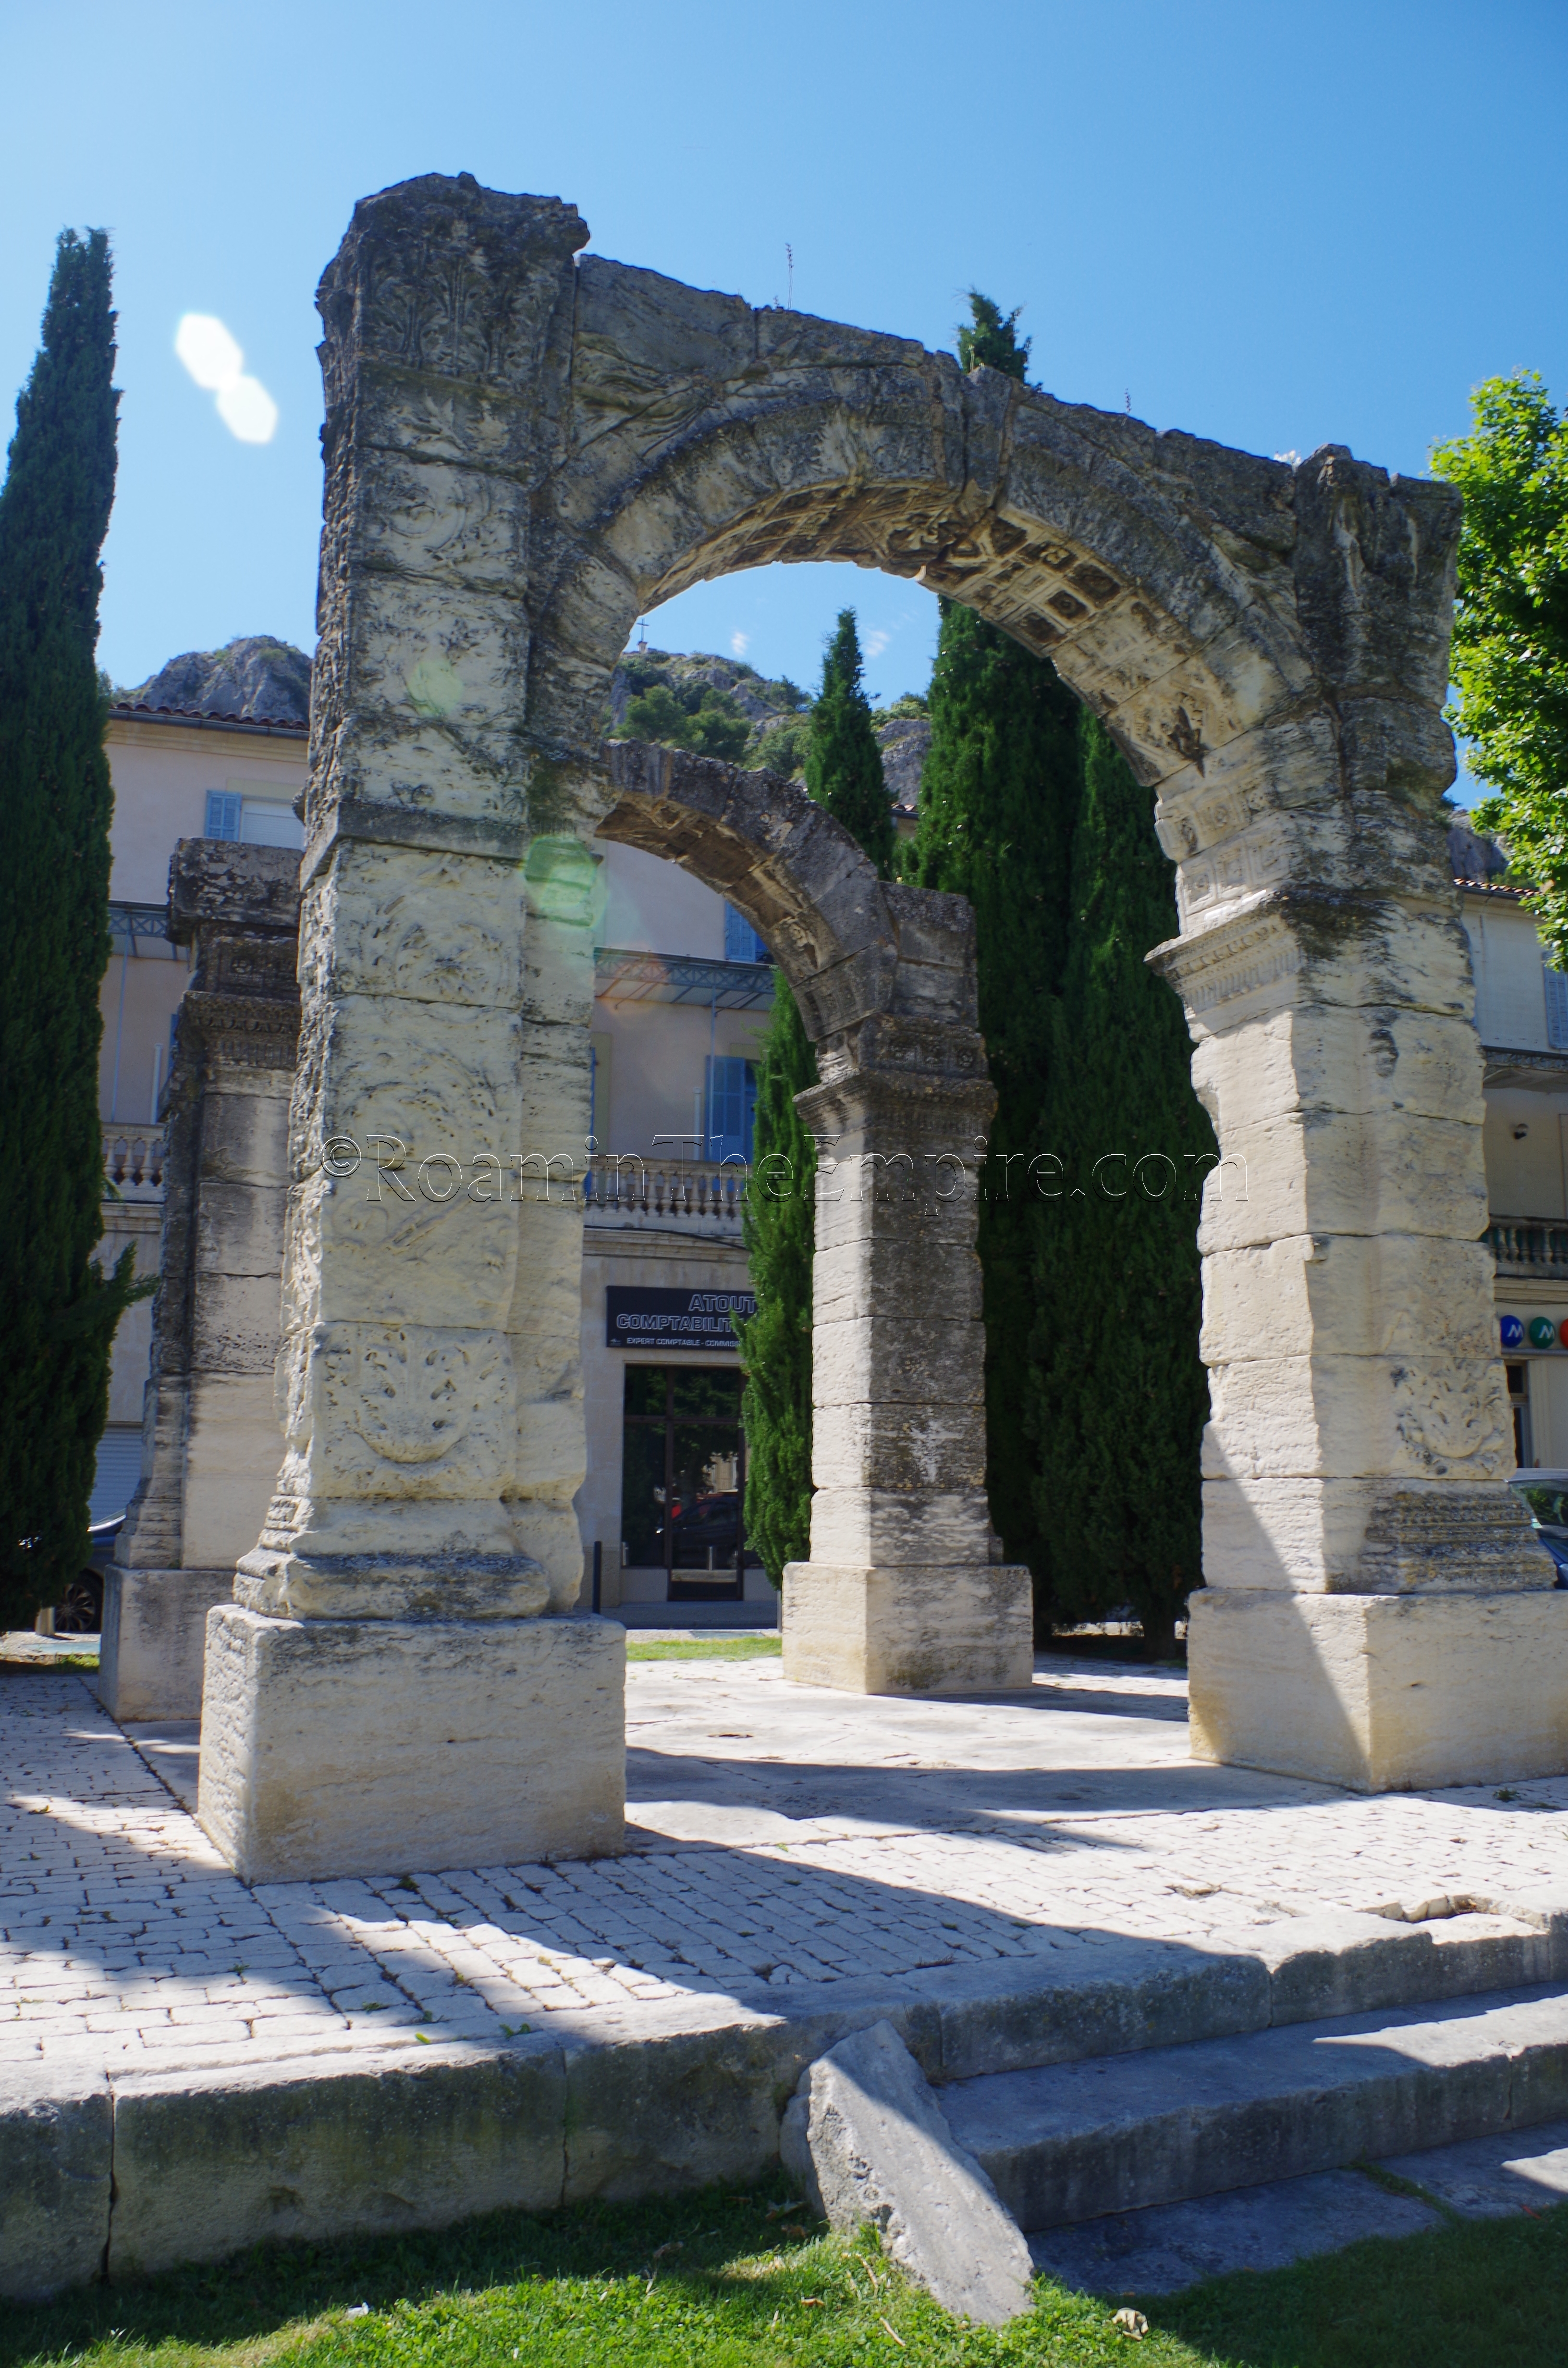 East face of the Roman arch at Cavaillon. Cabellio. Gallia Narbonensis.